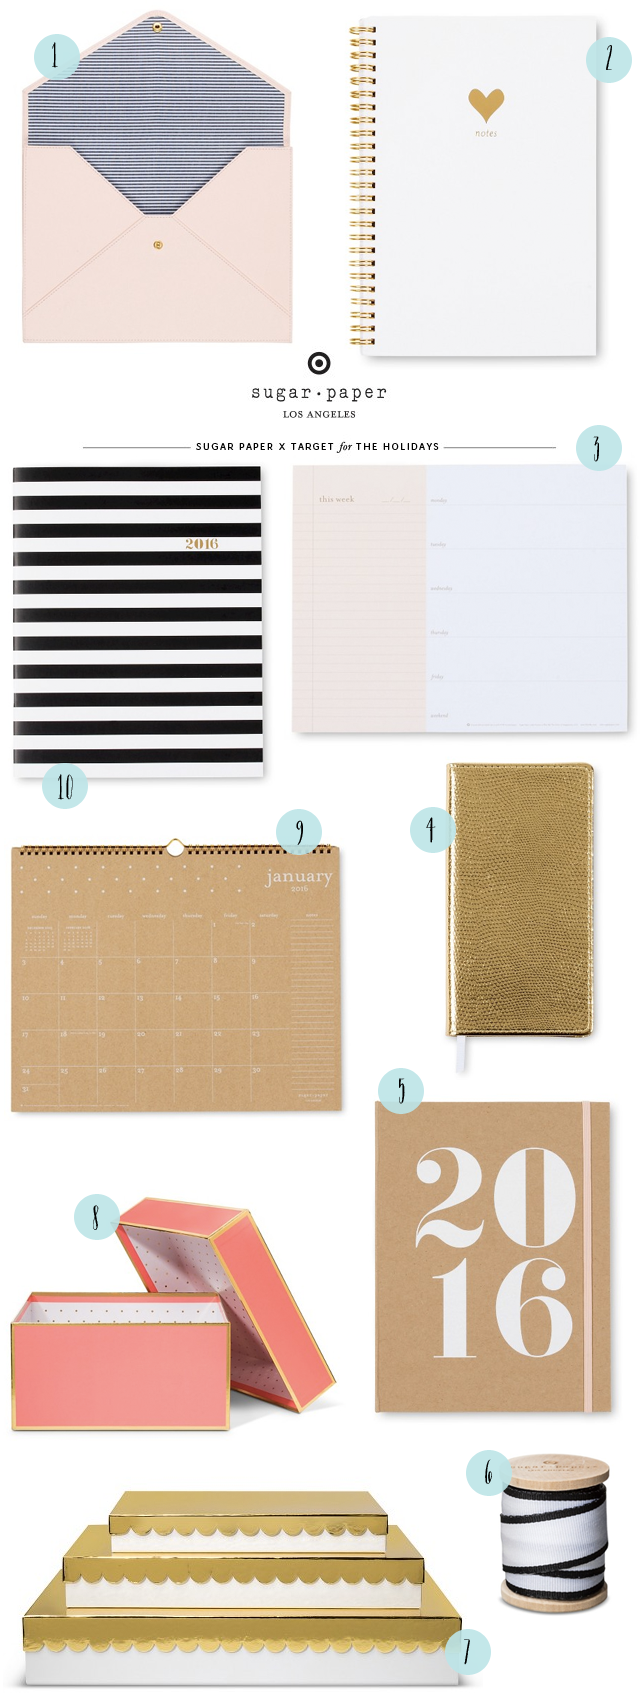 Quick Pick: Sugar Paper for Target 2015 / Oh So Beautiful Paper